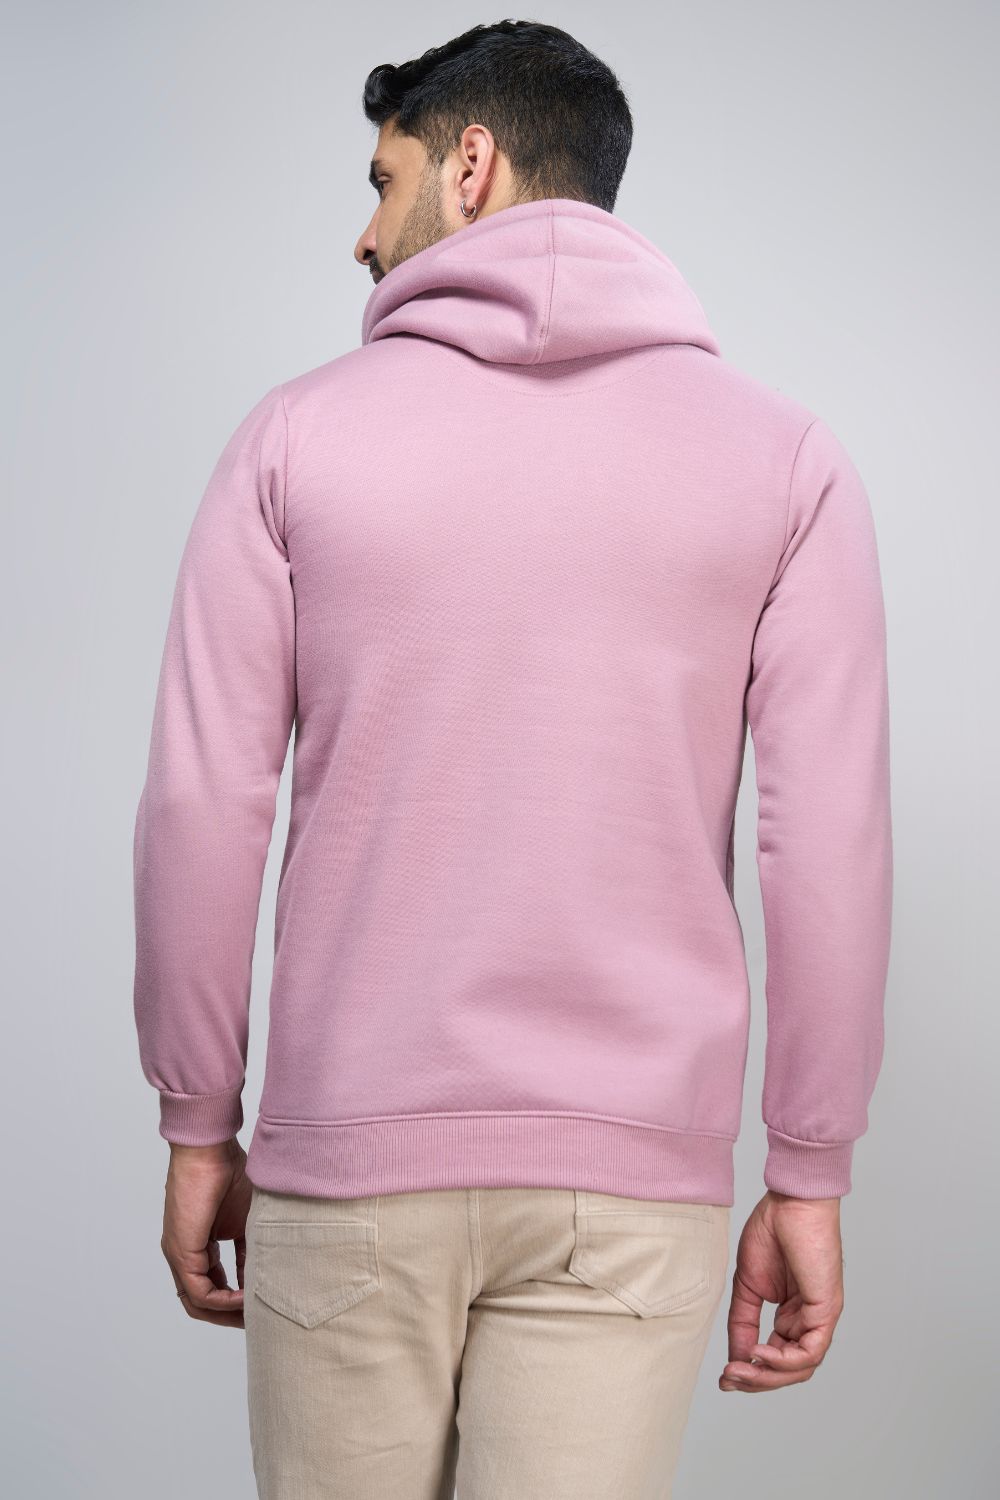 Rich Lilac colored, hoodie for men with full sleeves and relaxed fit, back view.